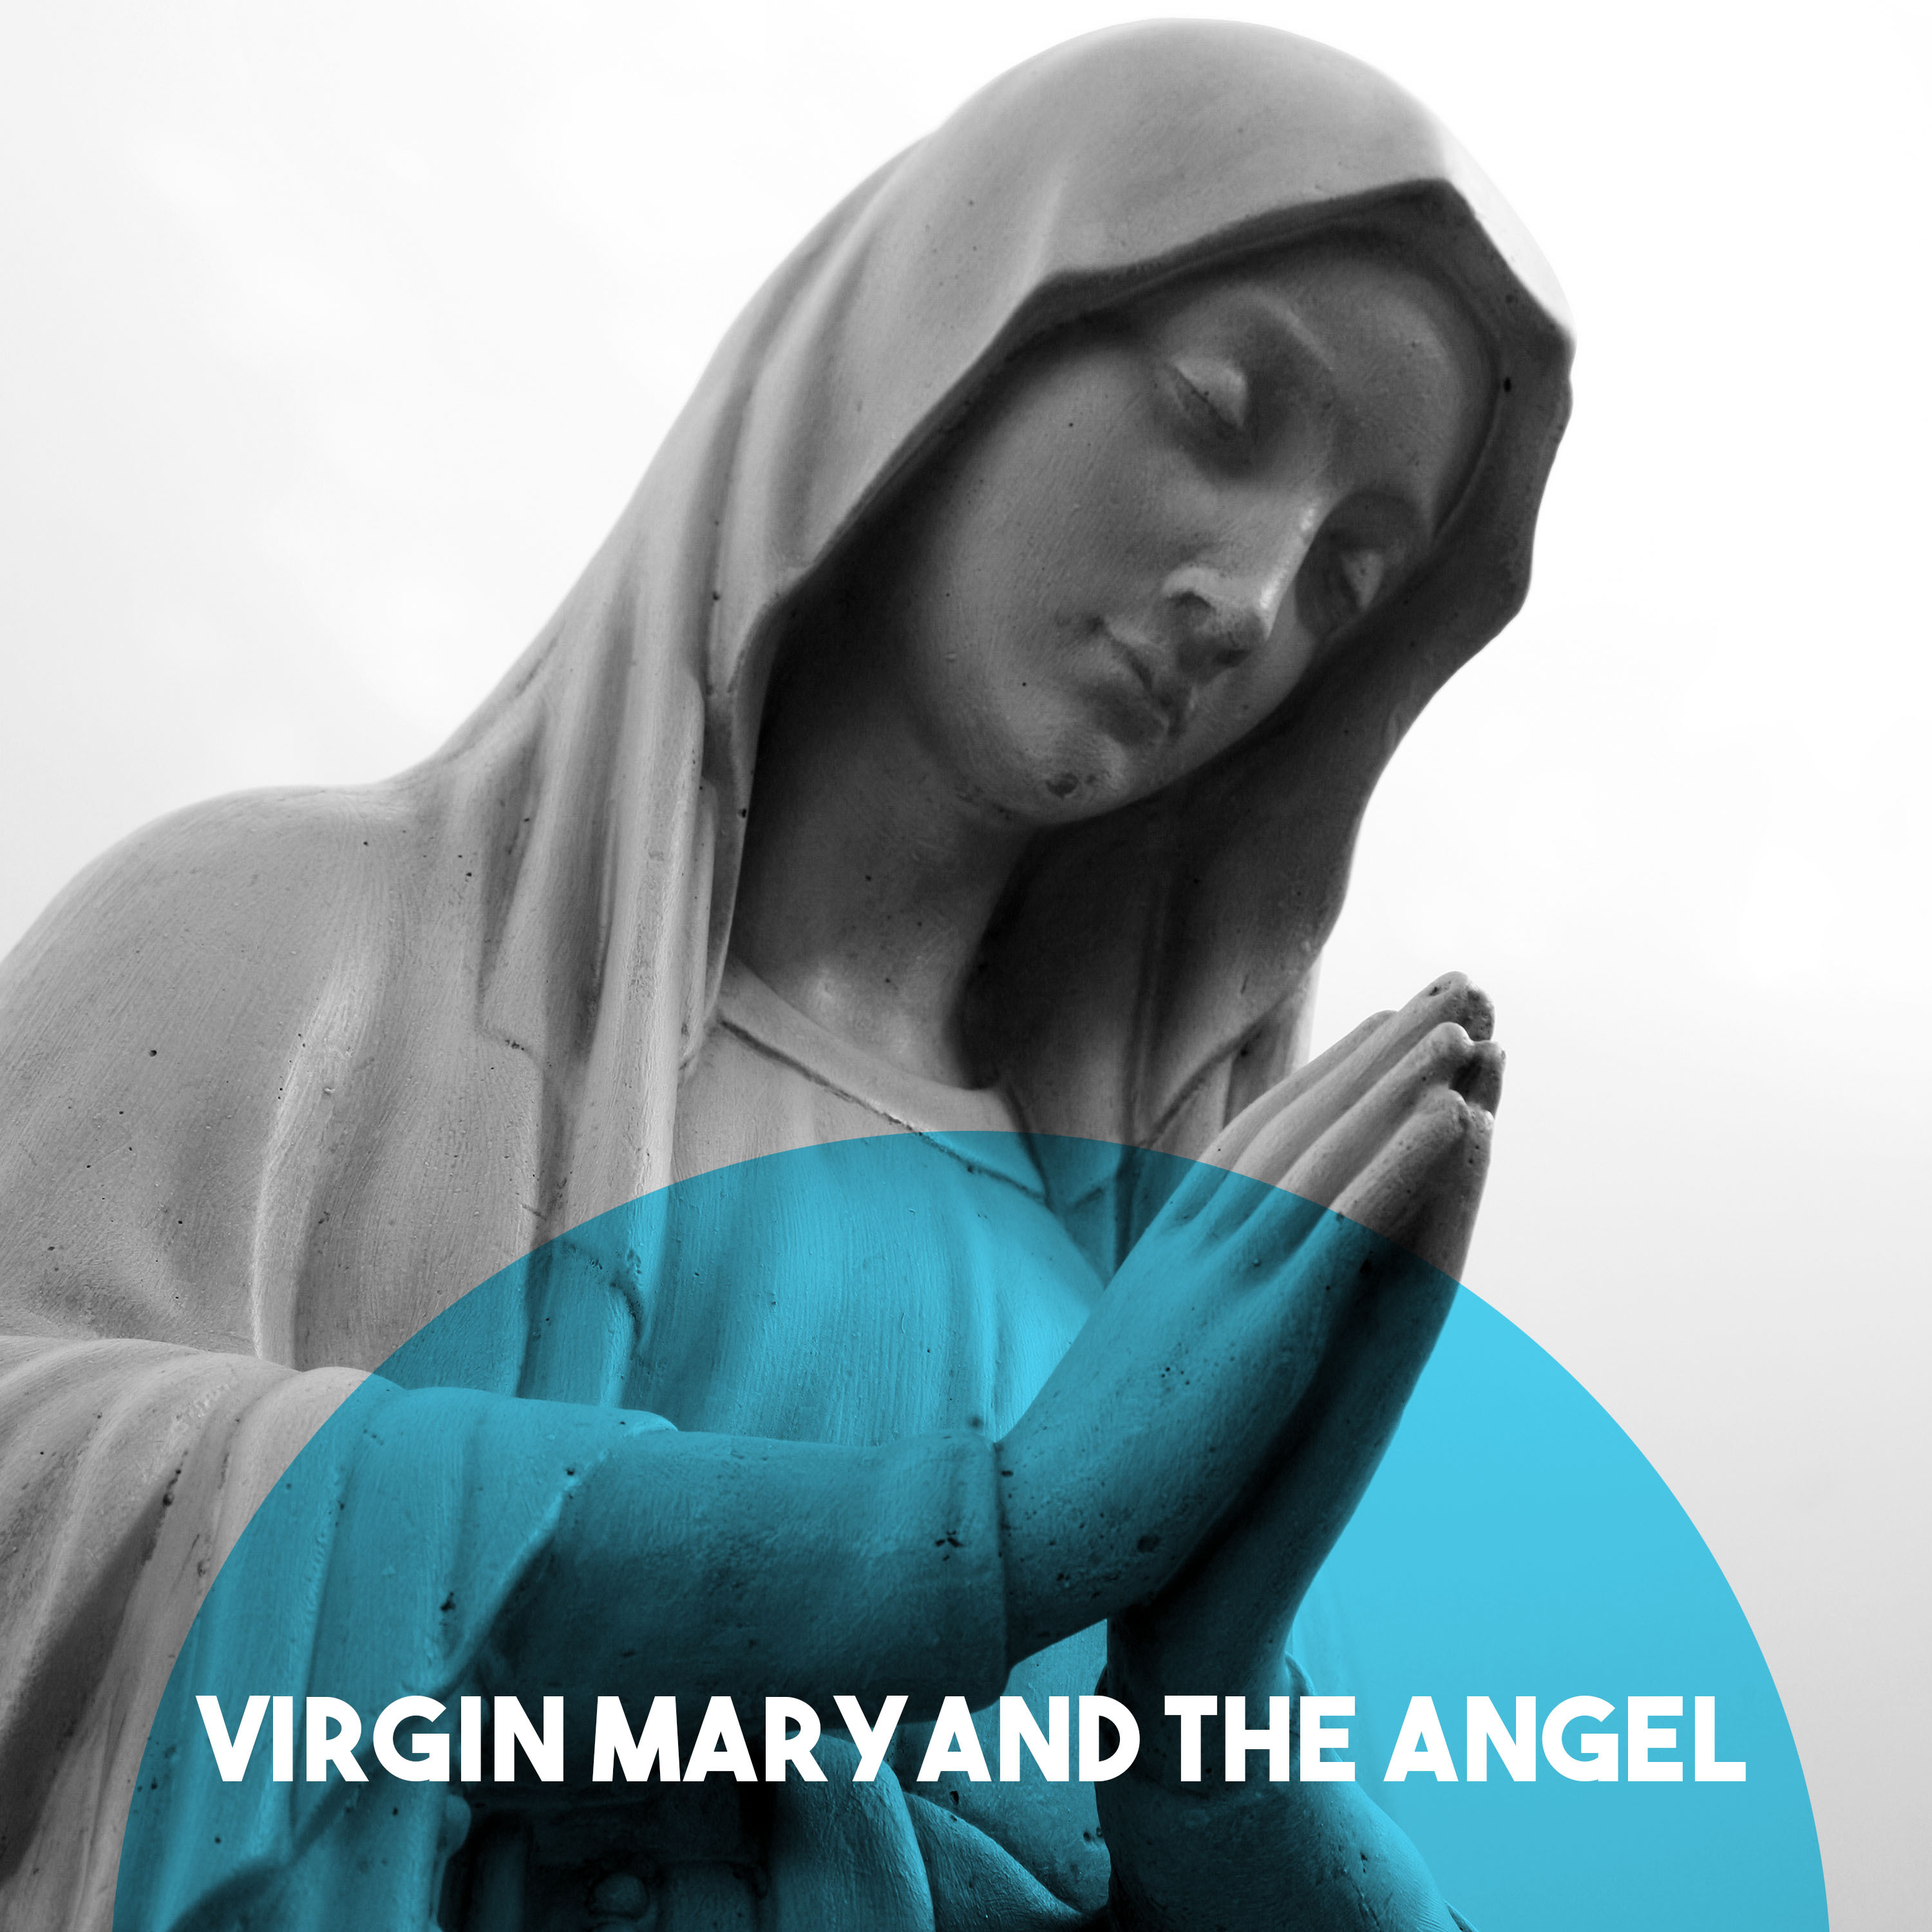 Virgin Mary and the Angel